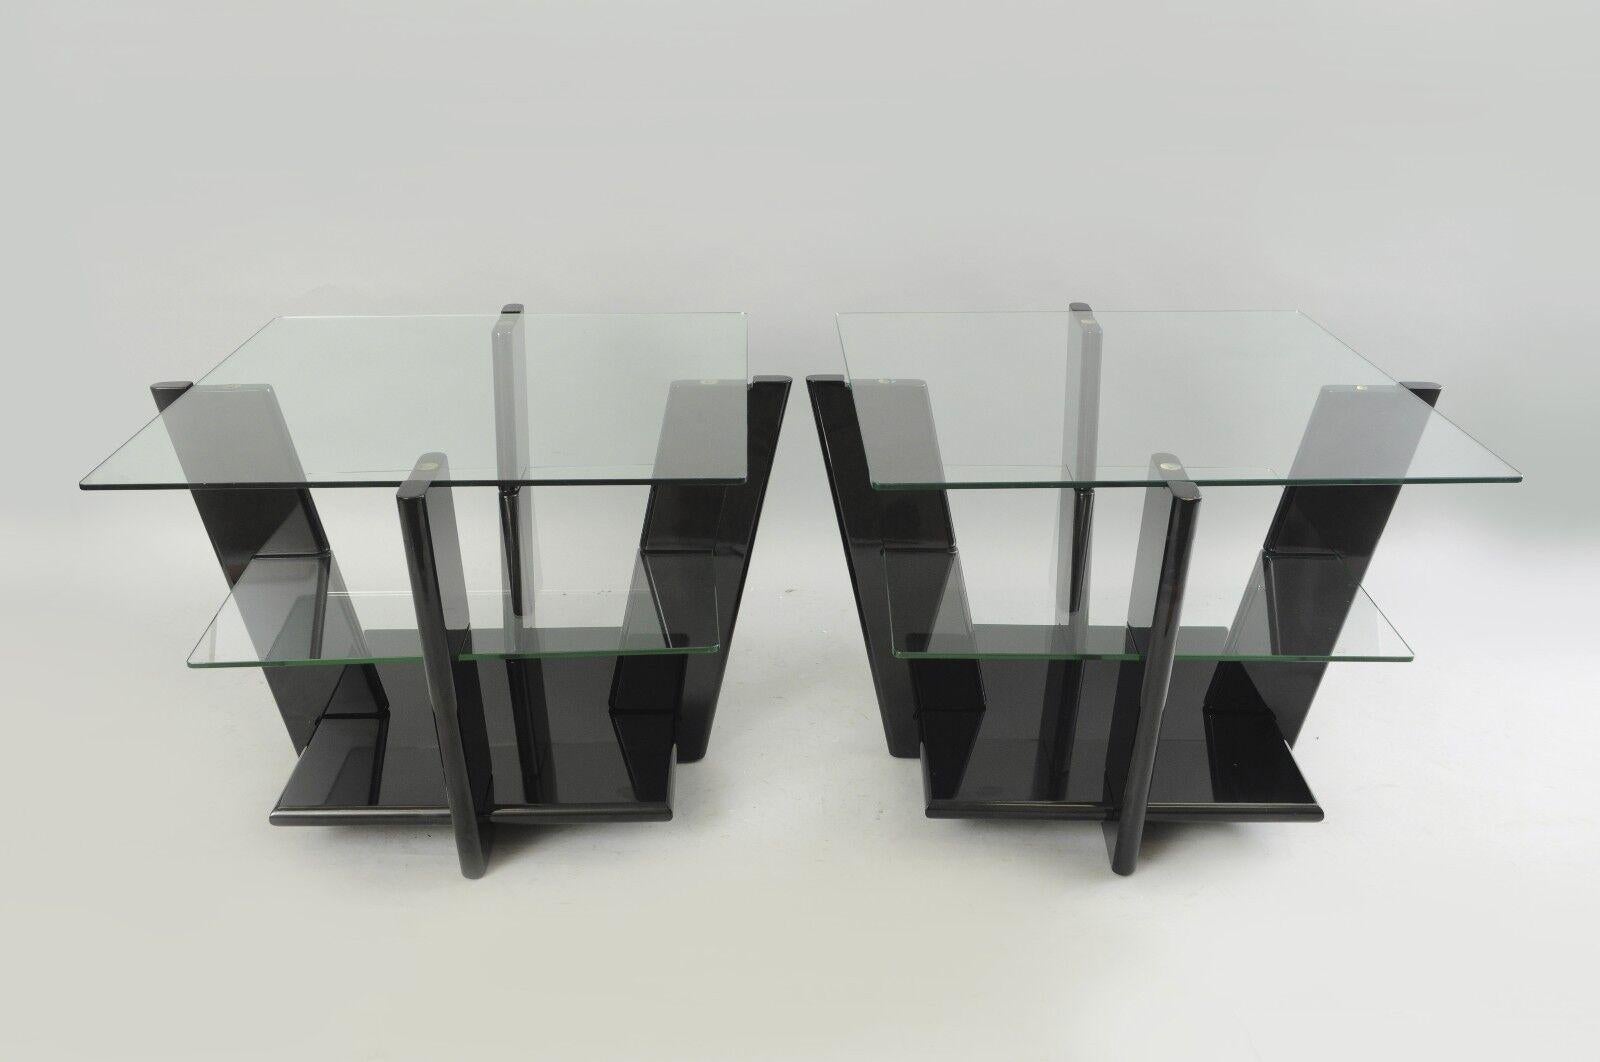 Large pair of contemporary modern black lacquer & glass sculptural 3 tier end tables. Item features unique black lacquered bases, 2 square glass tiers, one solid lower surface, 4 angled supports, sleek Modern form, very impressive tables. Circa Late